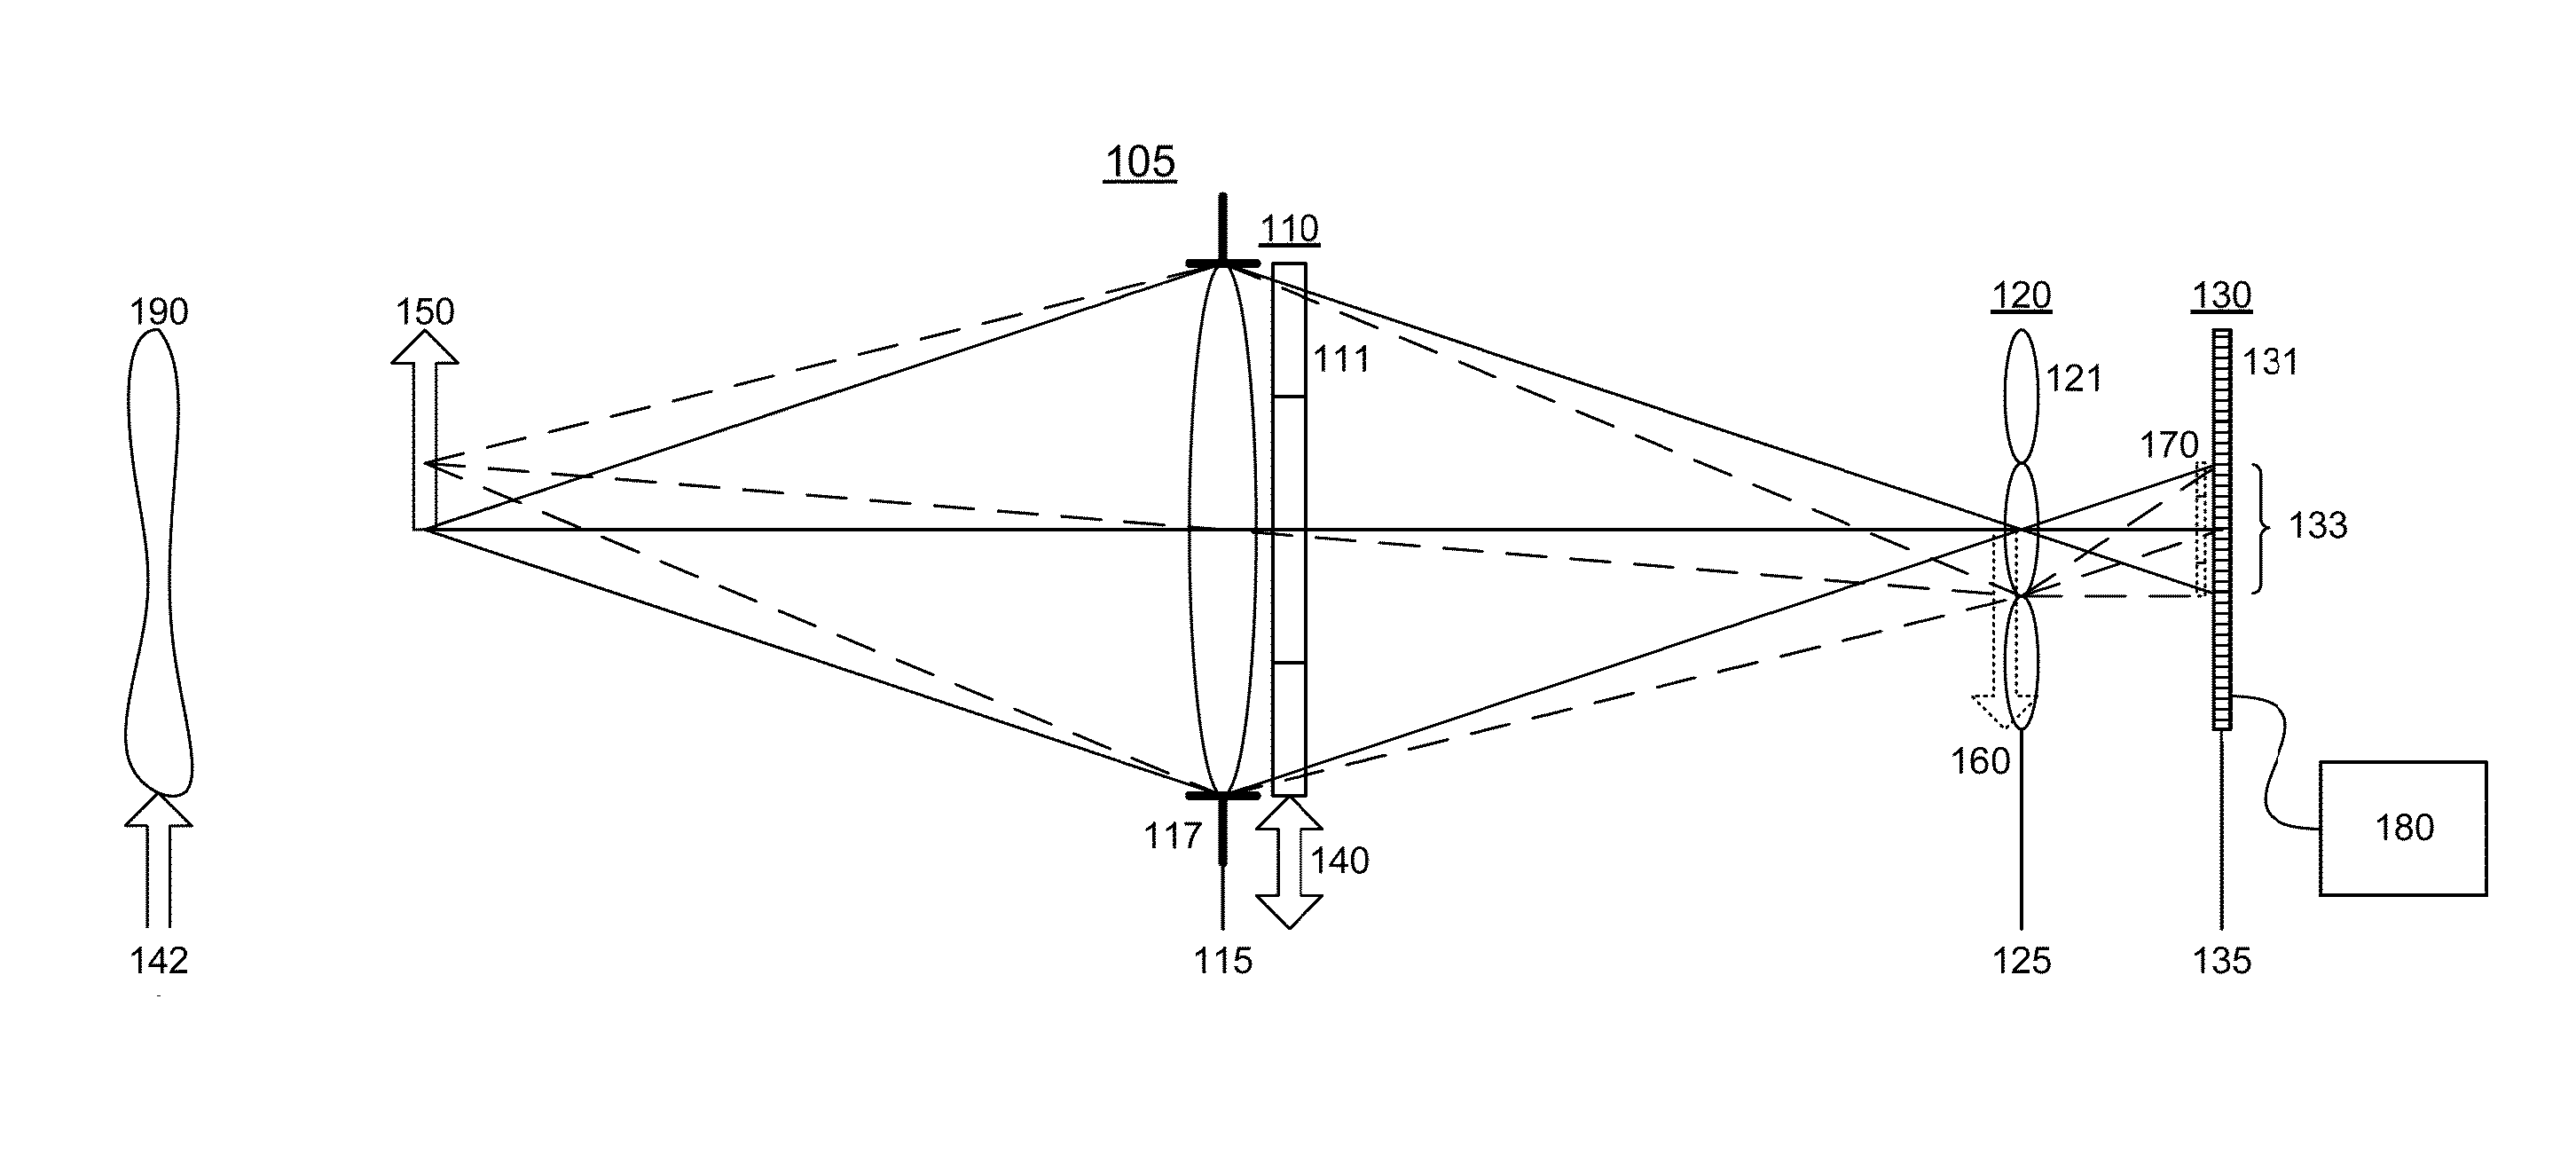 Dynamic Adjustment of Multimode Lightfield Imaging System Using Exposure Condition and Filter Position